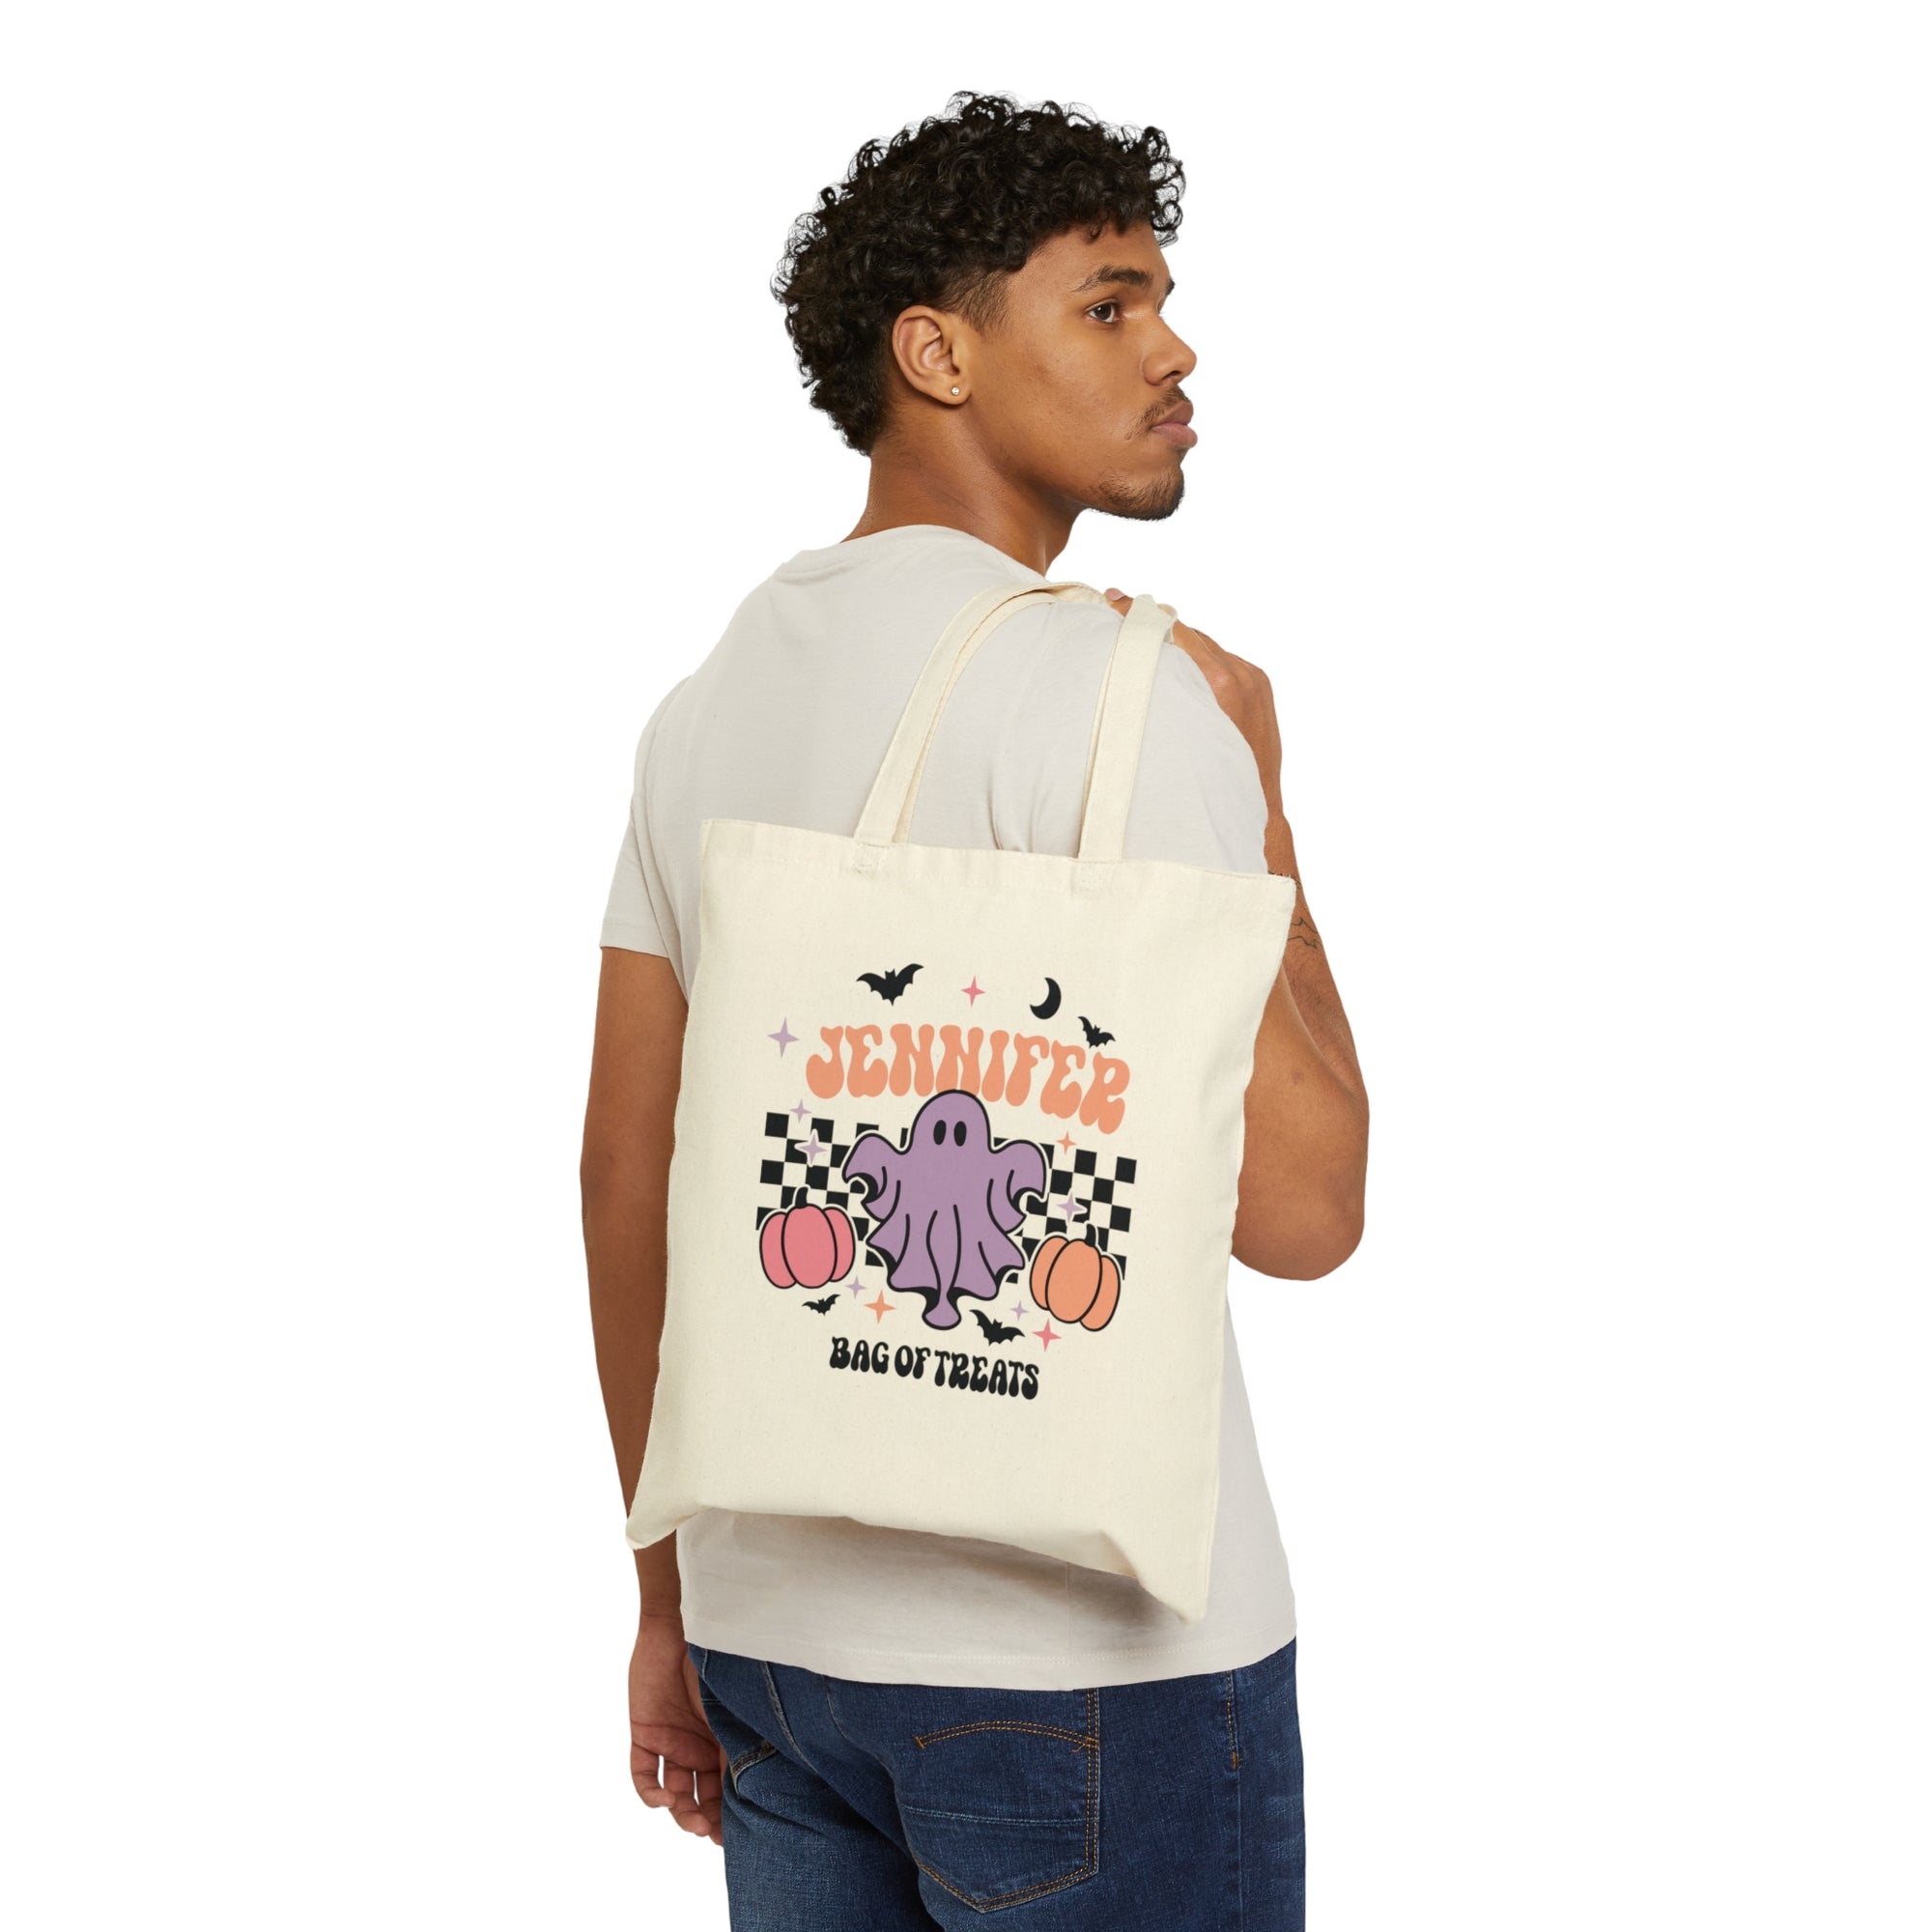 Copy of Personalized Trick or Treat Tote Bag